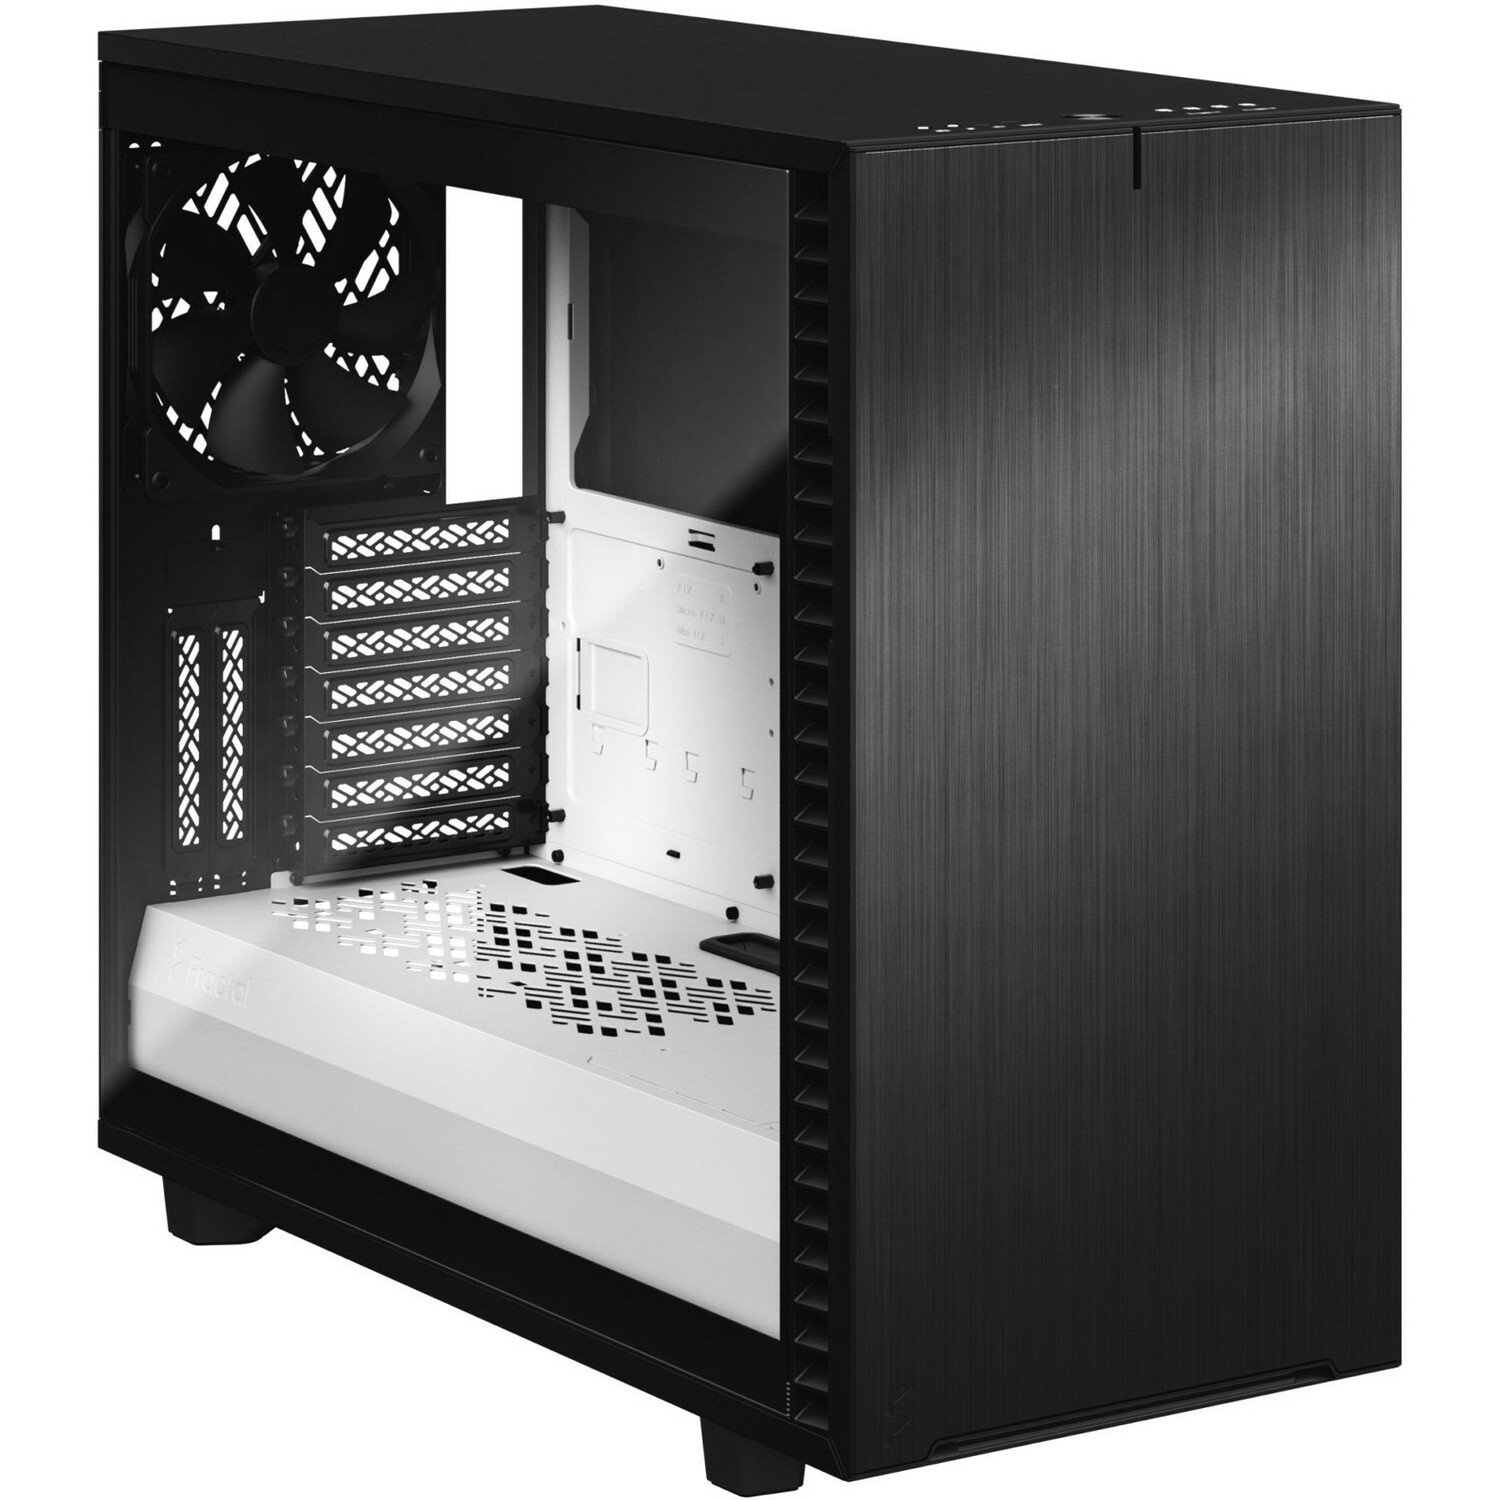 Fractal Design Define 7 Computer Case - ATX Motherboard Supported - Steel, Anodized Aluminium - Black, White